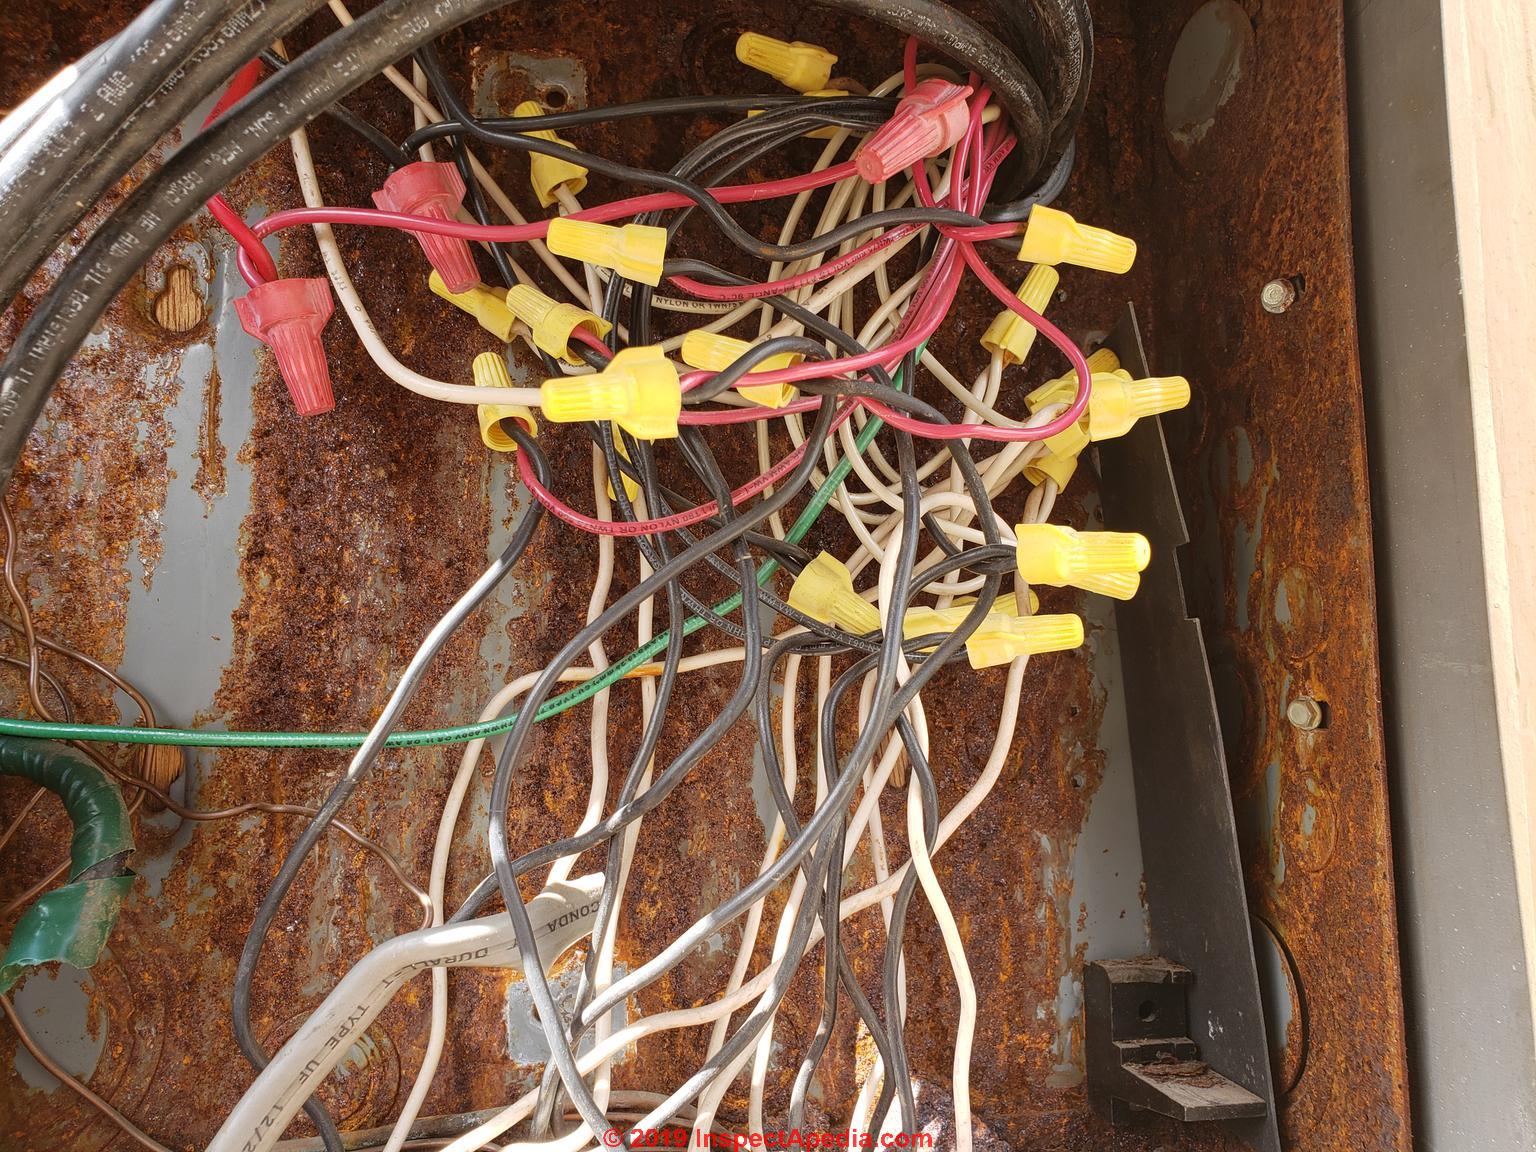 A mobile home wiring Mobile Home